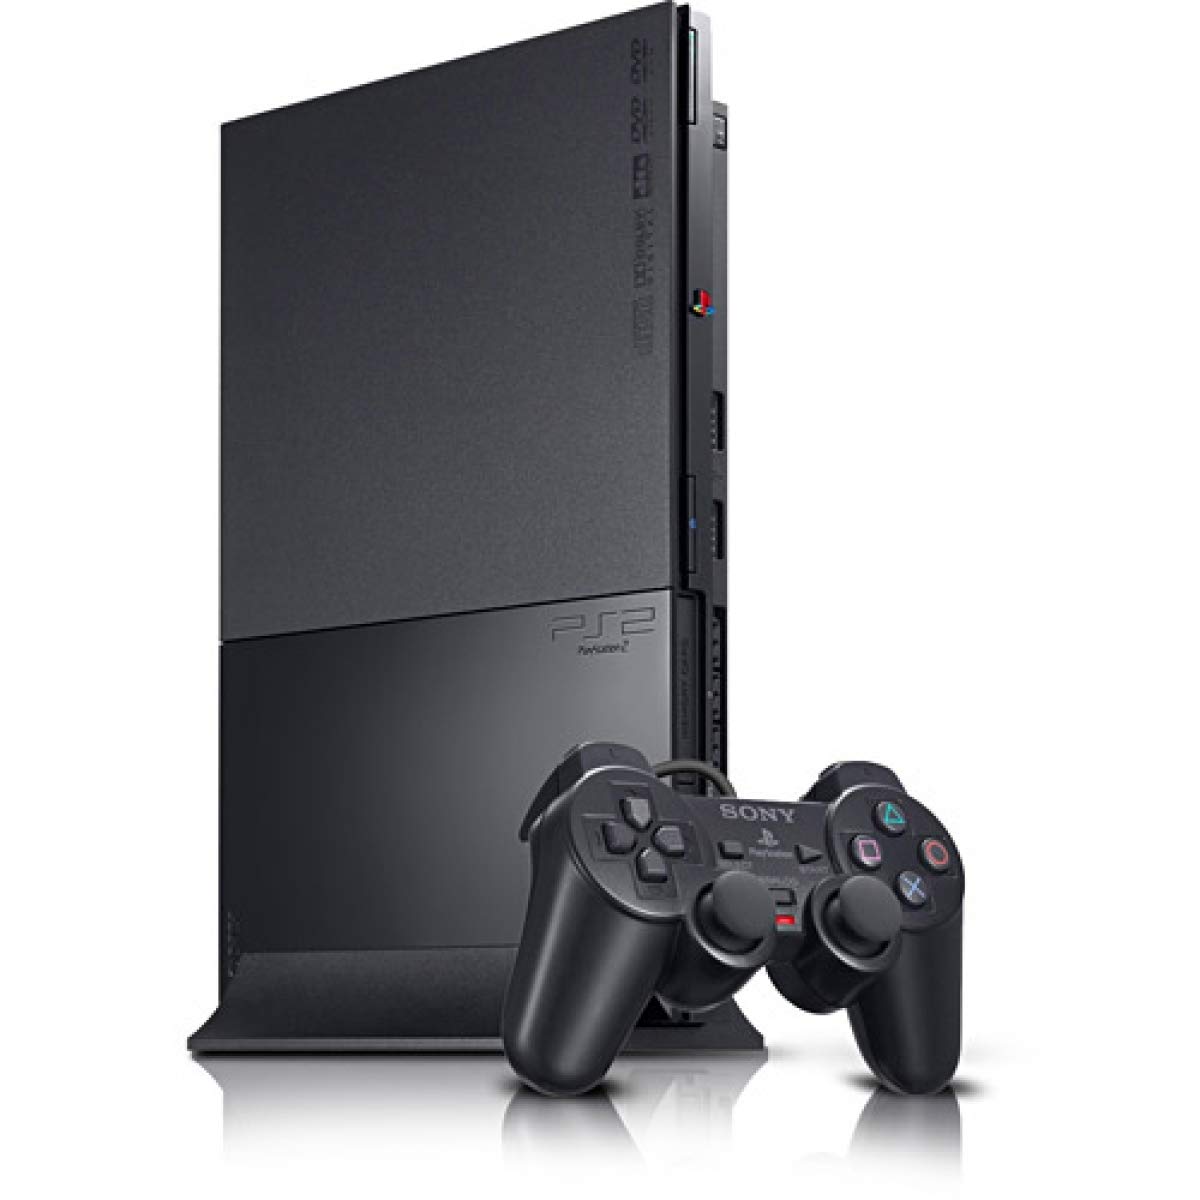 Turn off the PS2 Slimline SCPH-7500x
Unplug the power cord from the console and wait for a few minutes